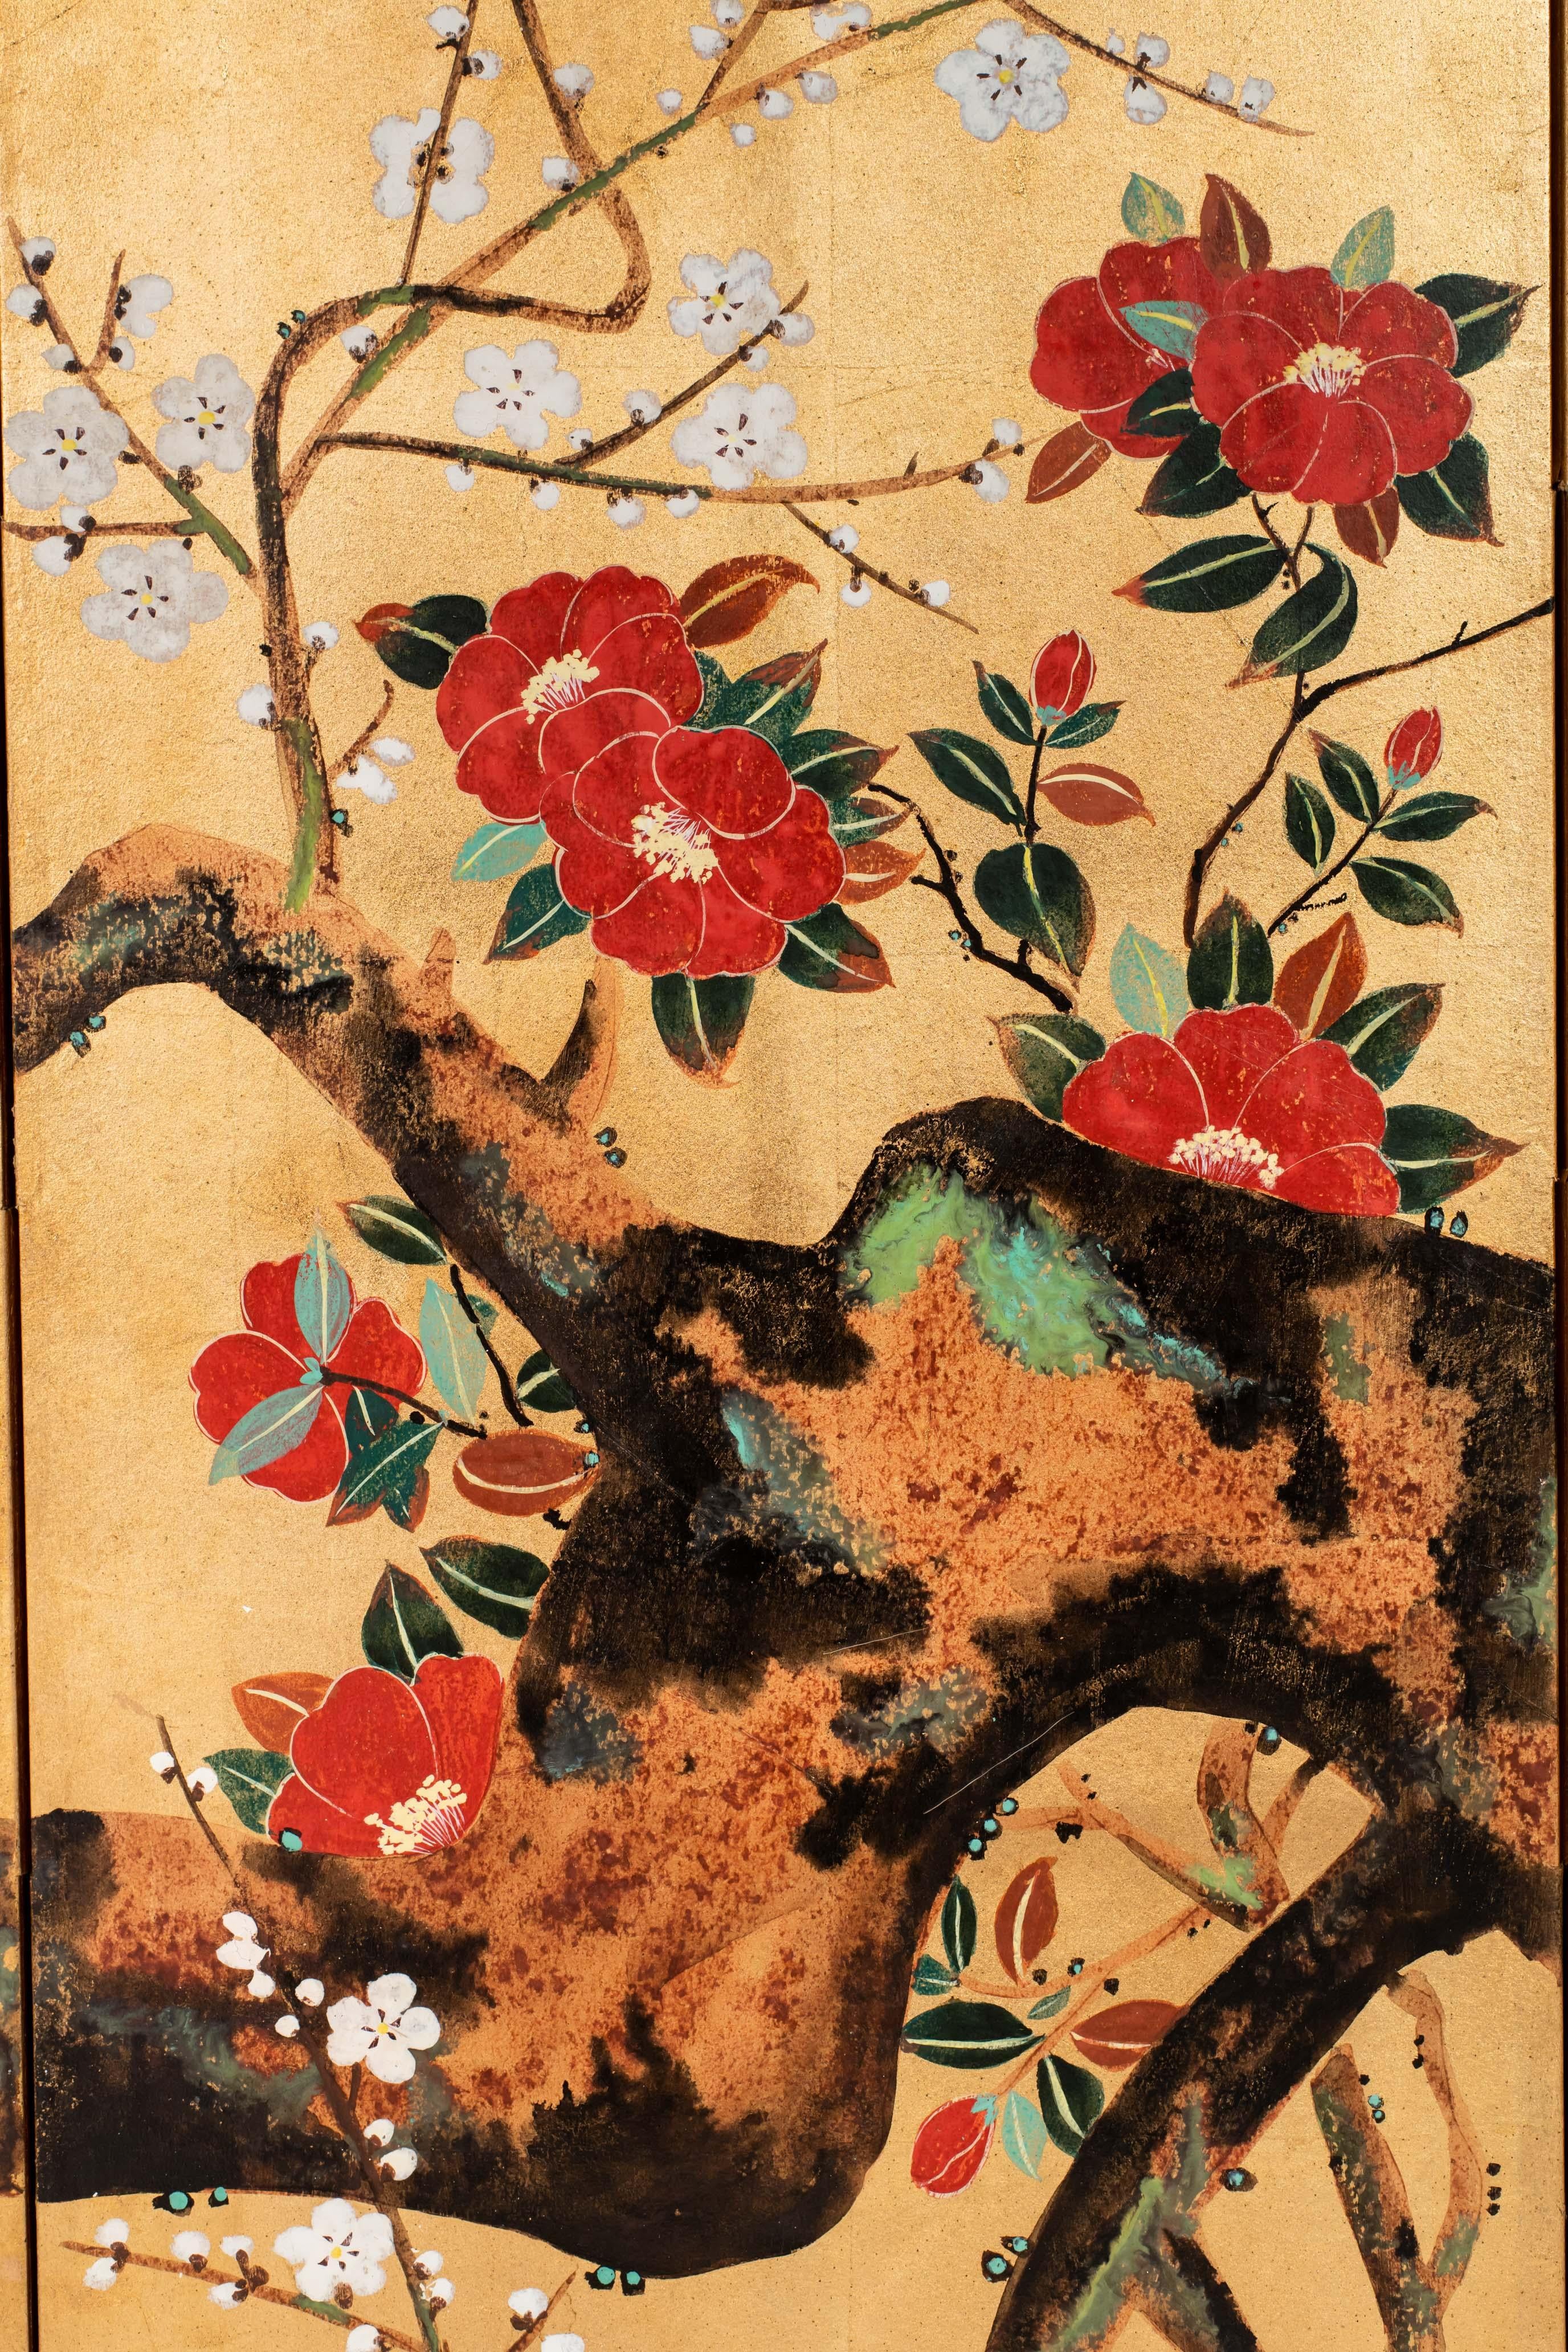 Gold Leaf Contemporary Hand-Painted Japanese Screen of Red and White Plum Blossom